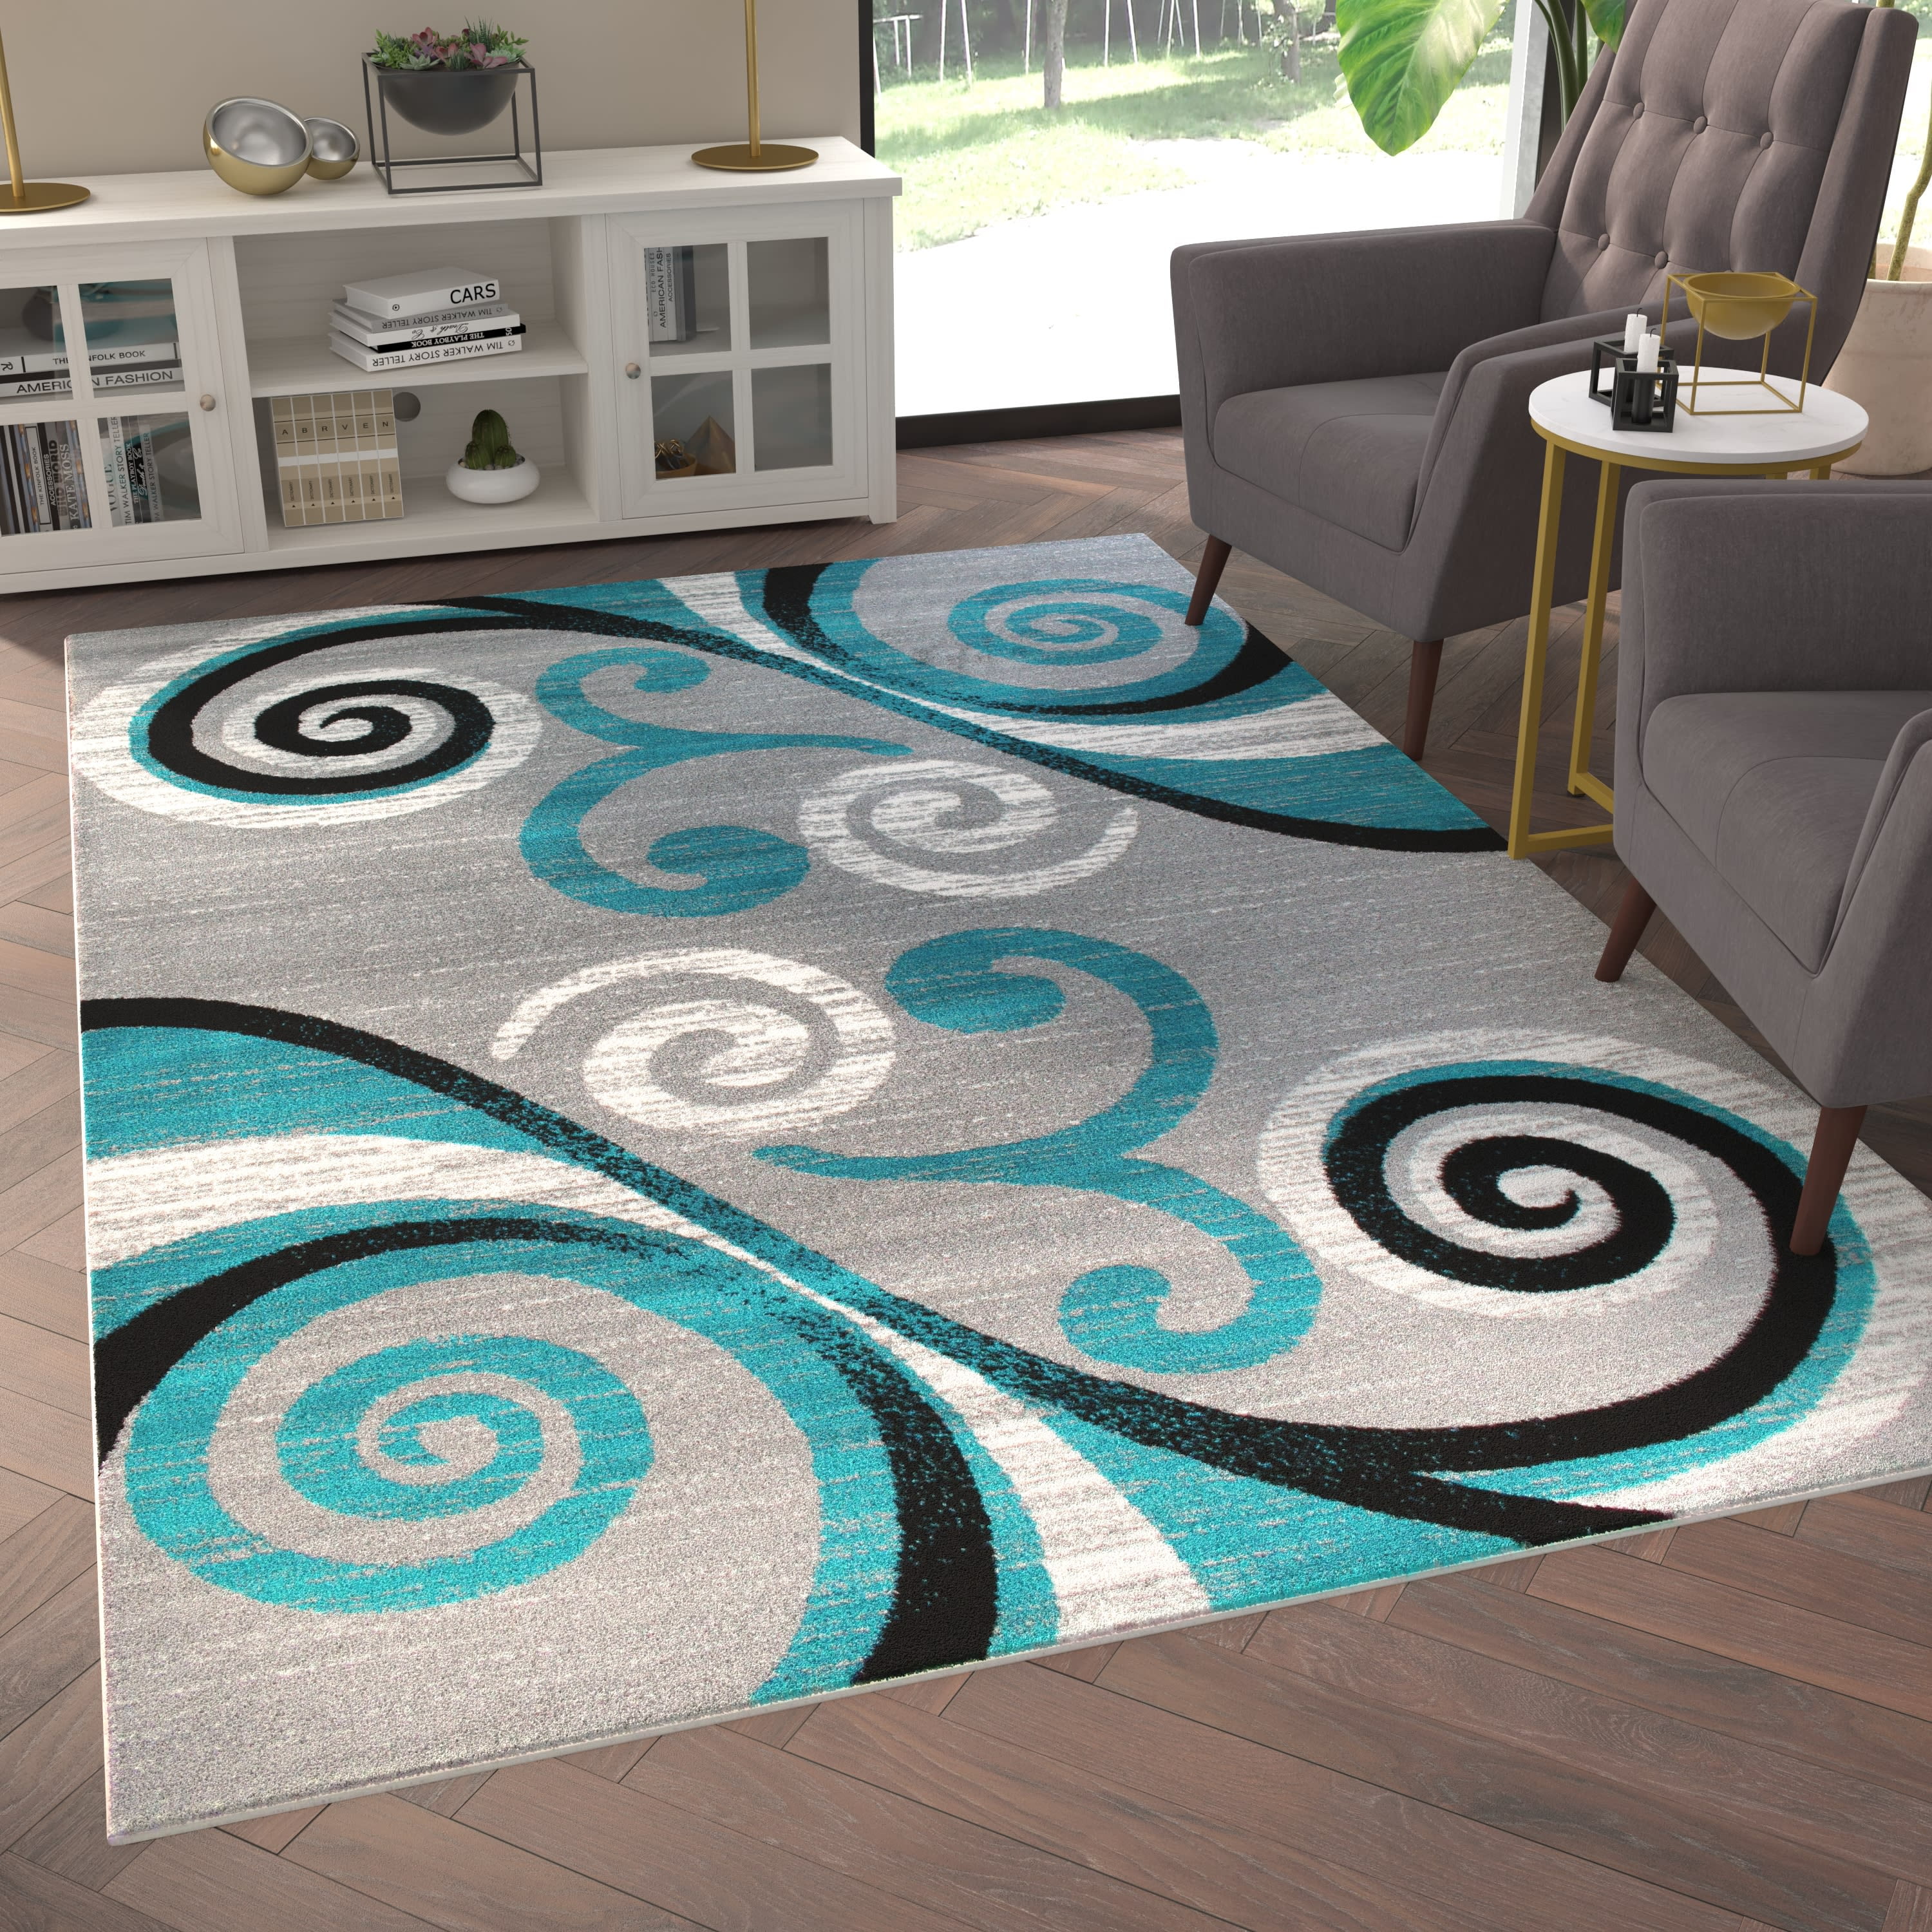 Emma And Oliver 6x9 Sed Look Ultra Soft Plush Pile Olefin Accent Rug In Turquoise Gray Black White Swirl Pattern Jute Backing